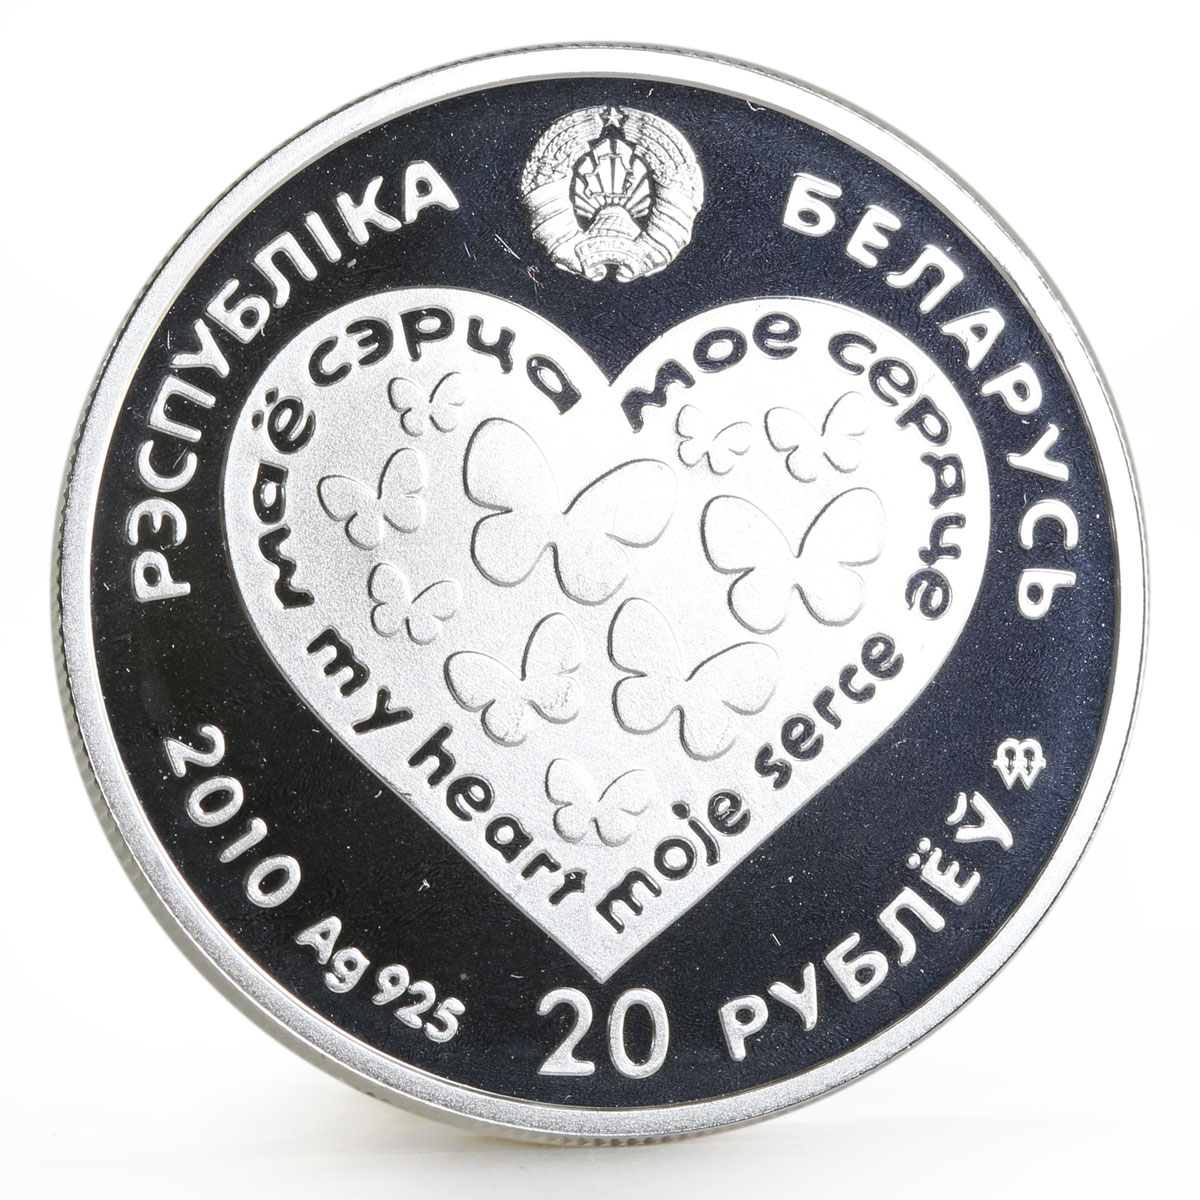 Belarus 20 rubles Love series My Heart Loving proof silver coin 2010